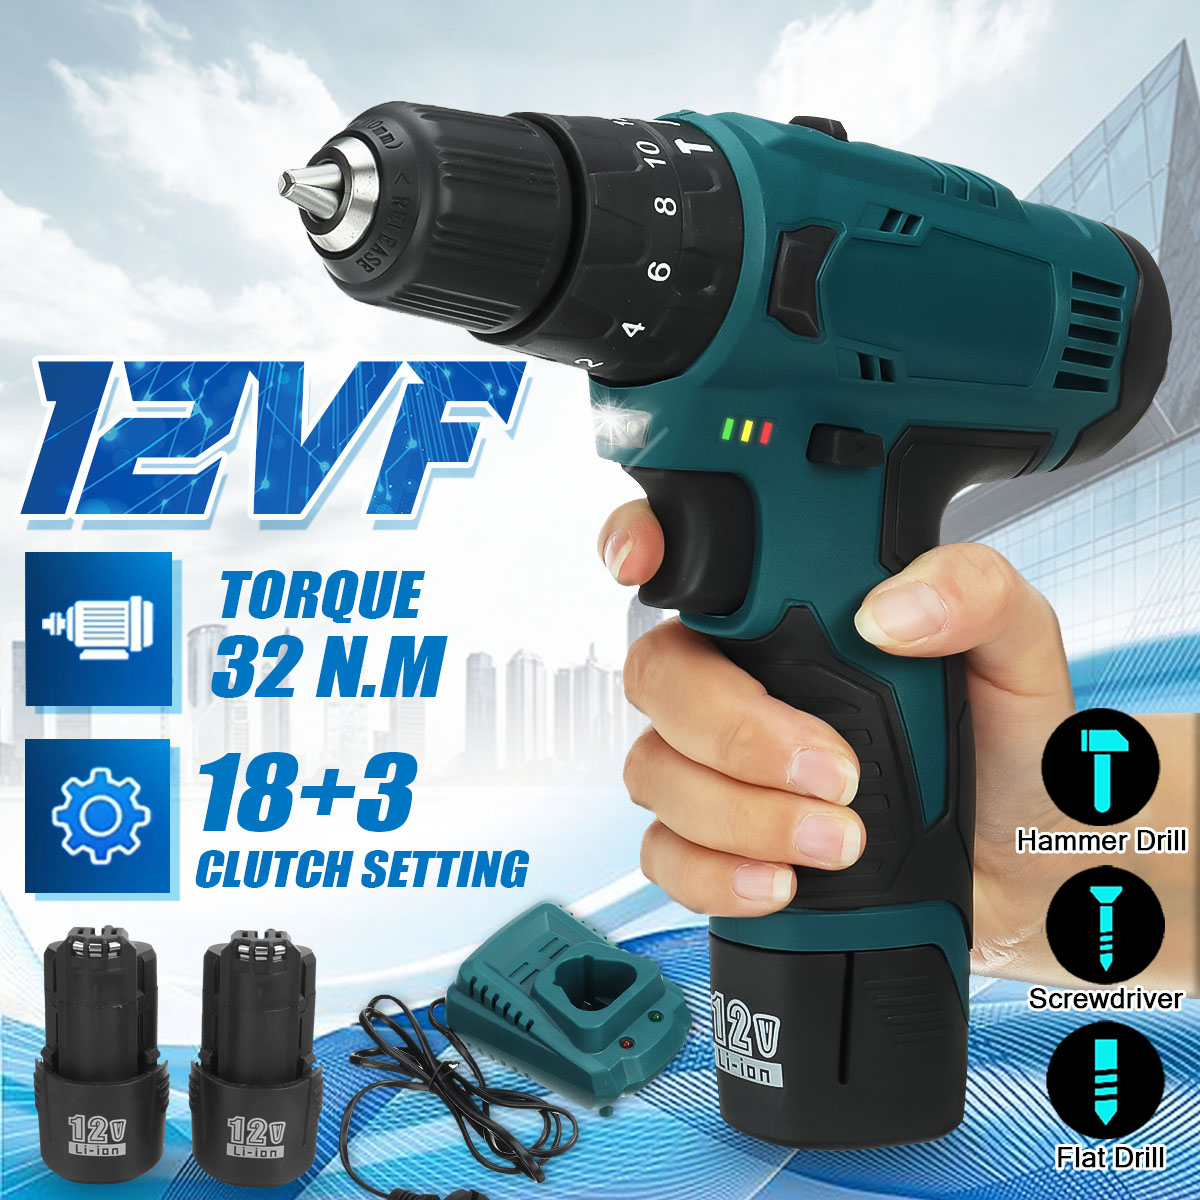 12V-1500mAh-3-IN-1-2-Speed-Cordless-Drill-Driver-Electric-Screwdriver-Hammer-Flat-Drill-183-Torque-1-1868432-1